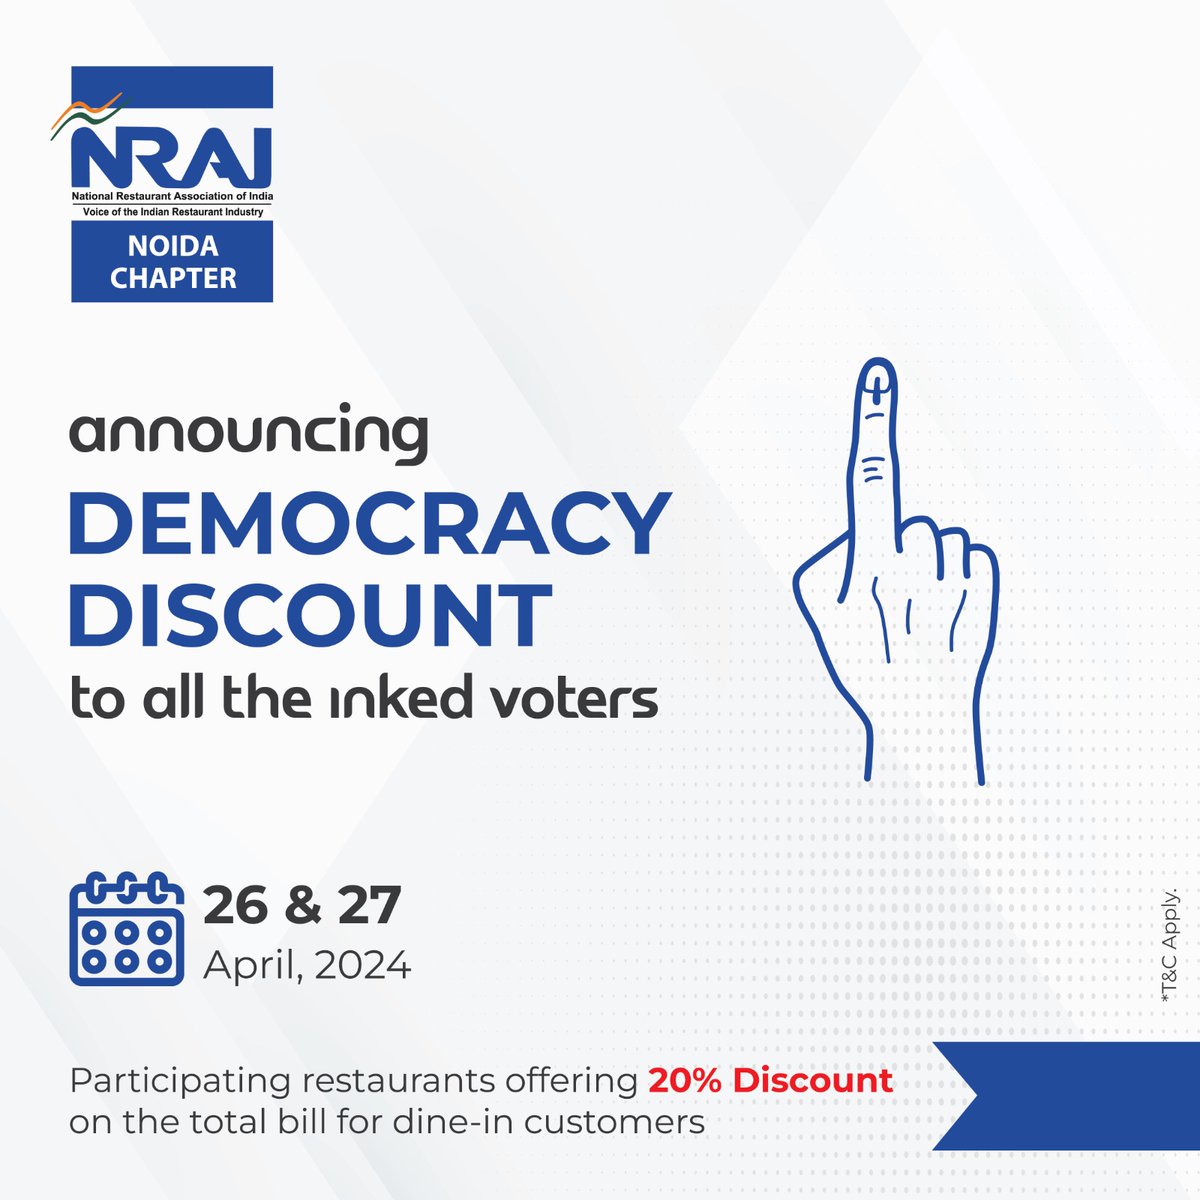 Attention inked voters! NRAI's NOIDA CHAPTER brings you the Democracy Discount initiative. Get 20% off your total bill at select restaurants on April 26th & 27th, 2024. It's our way of celebrating your vote! #DemocracyDiscount #NRAINOIDA #VoteAndSave #VoterPerks #InkedDining